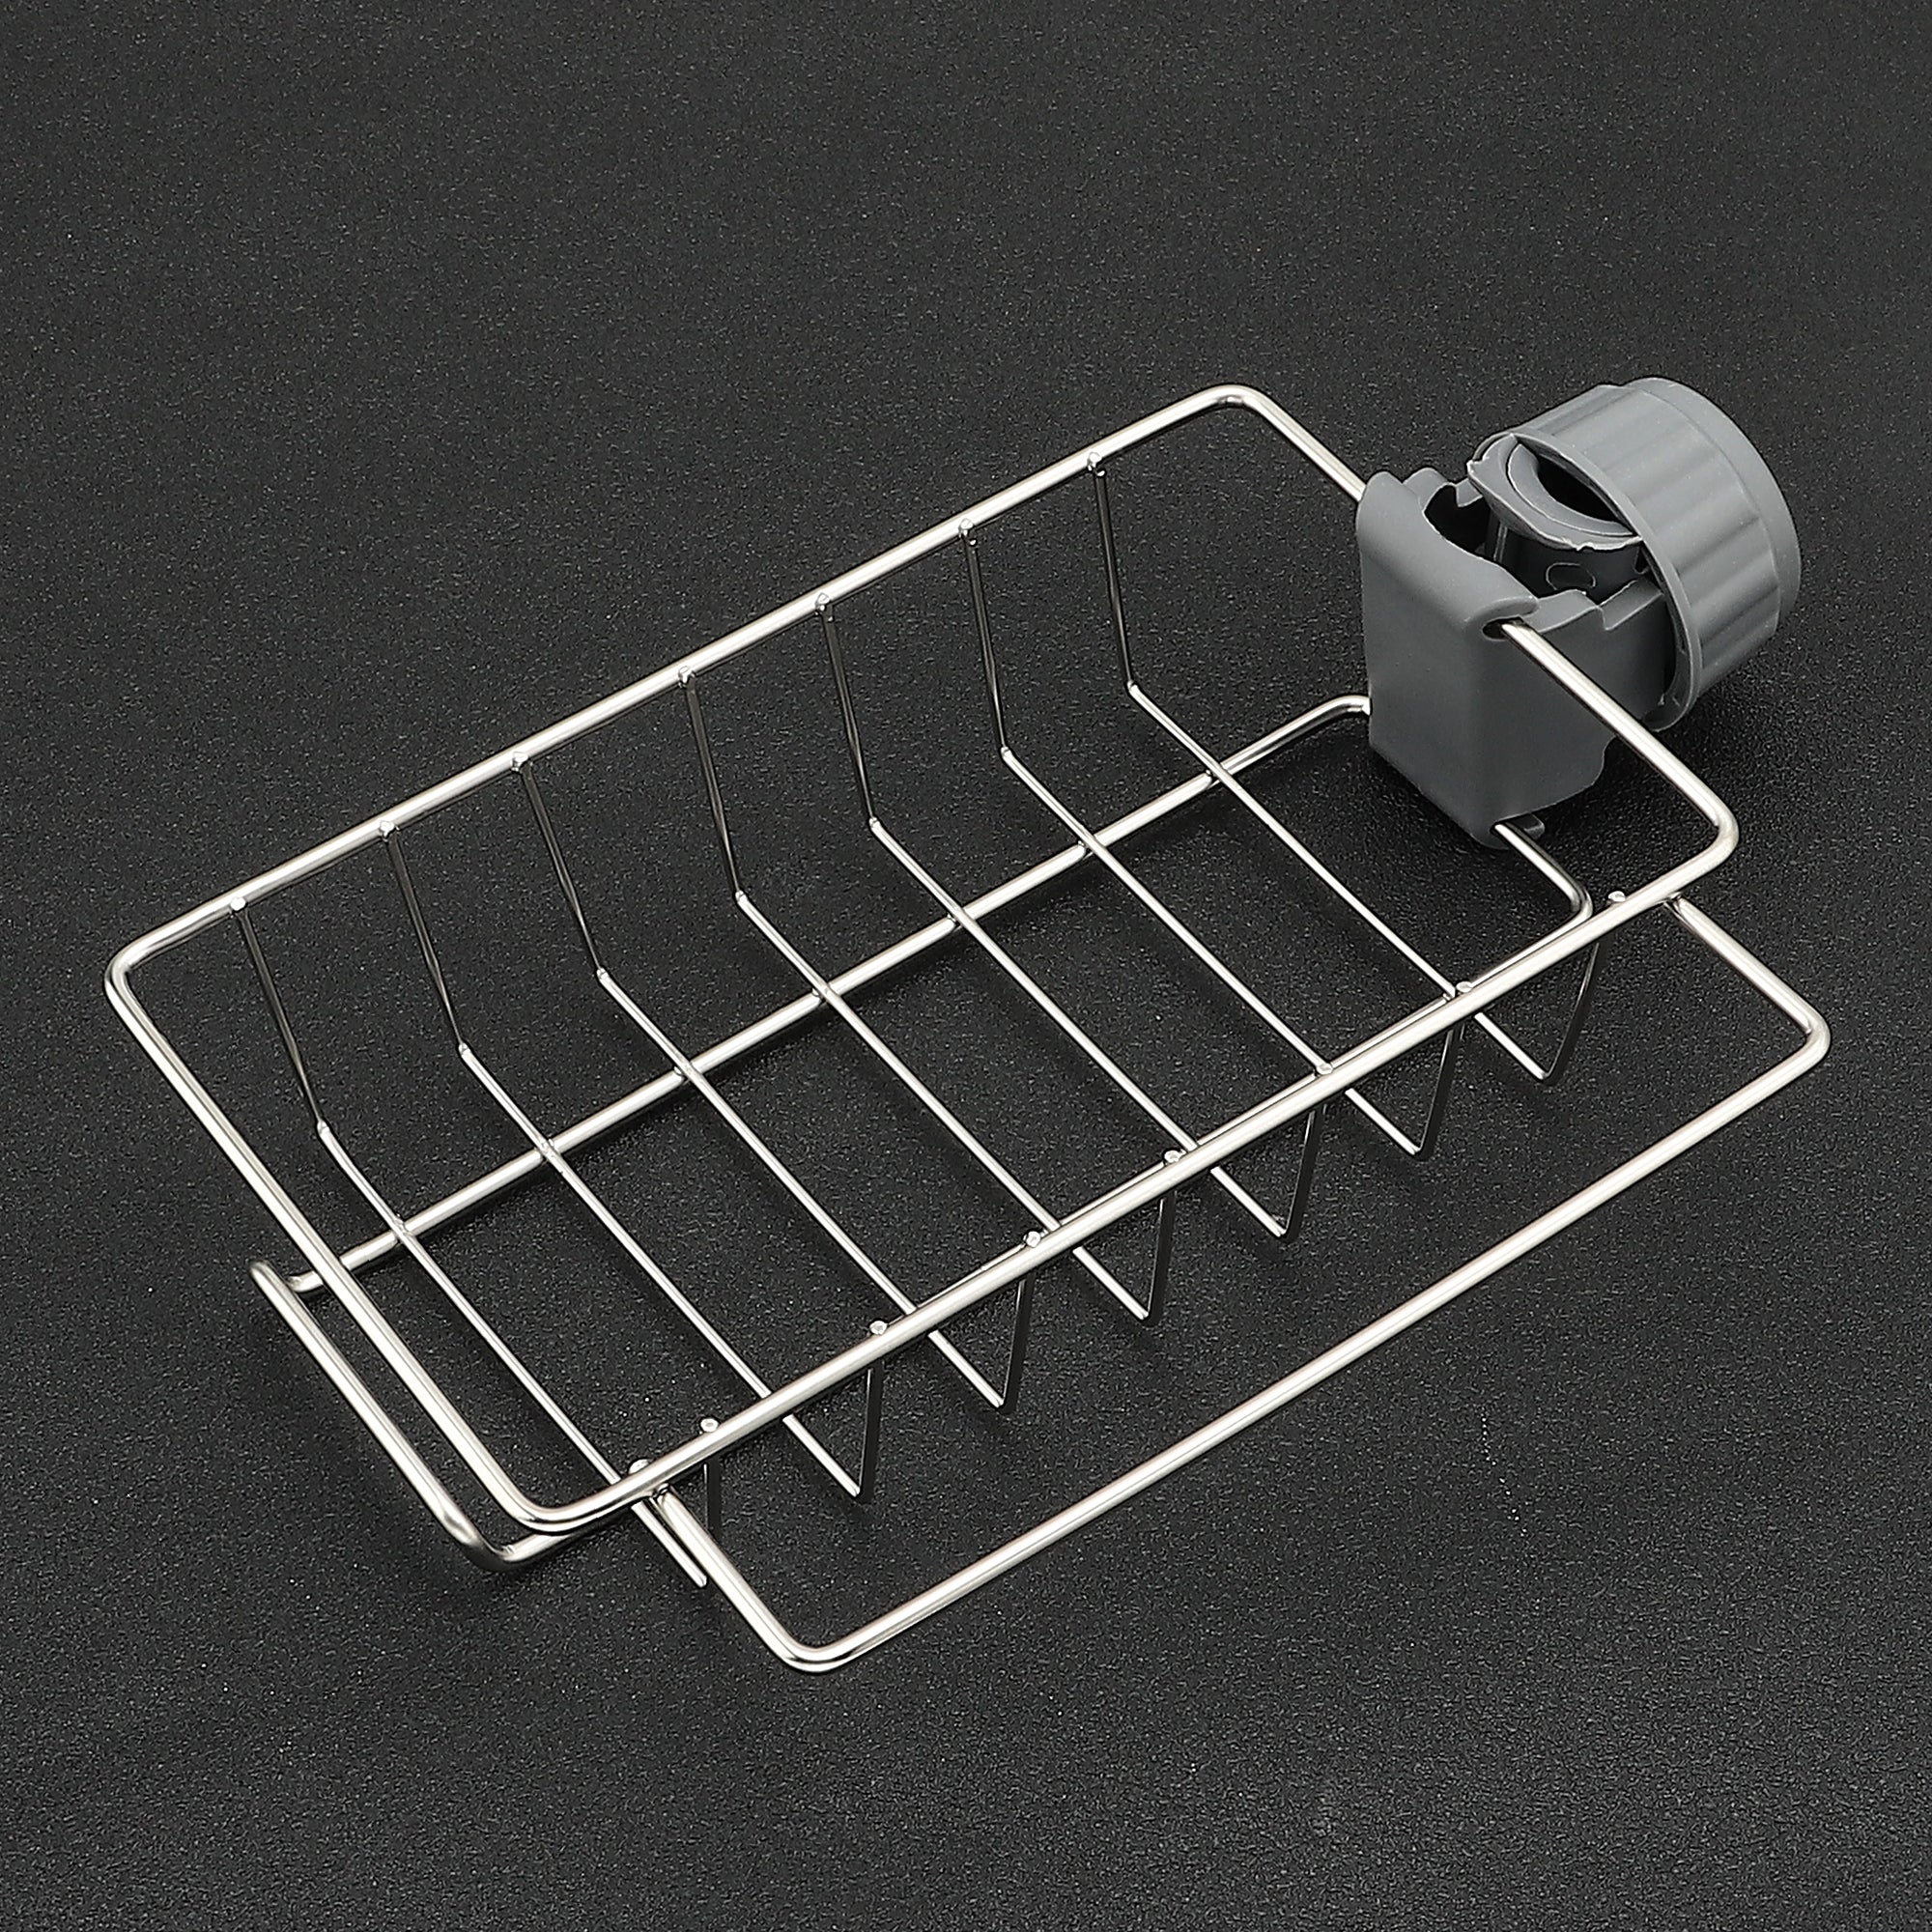 Stainless Steel Auto Drain Tray Partition Sponge Holder Self